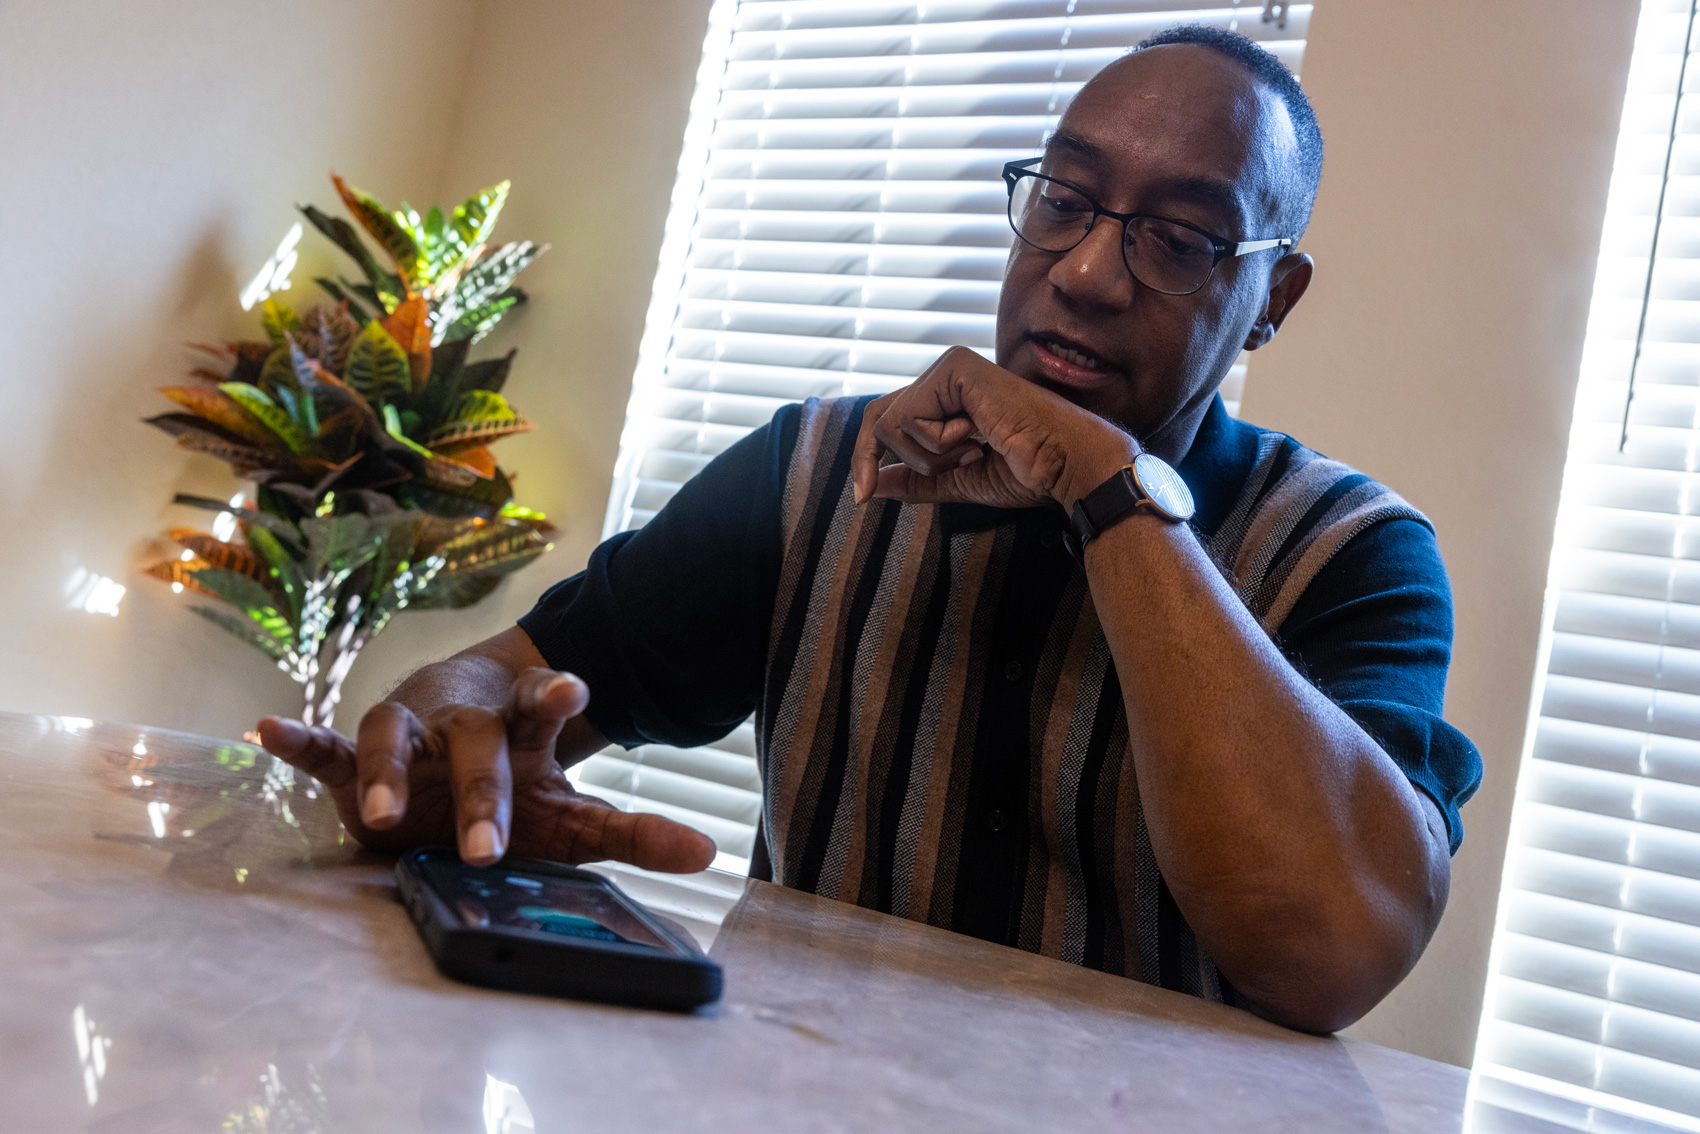 Sam Elam speaks with his brother Darius over the phone at his home, Tuesday, Sept. 26 in Houston.